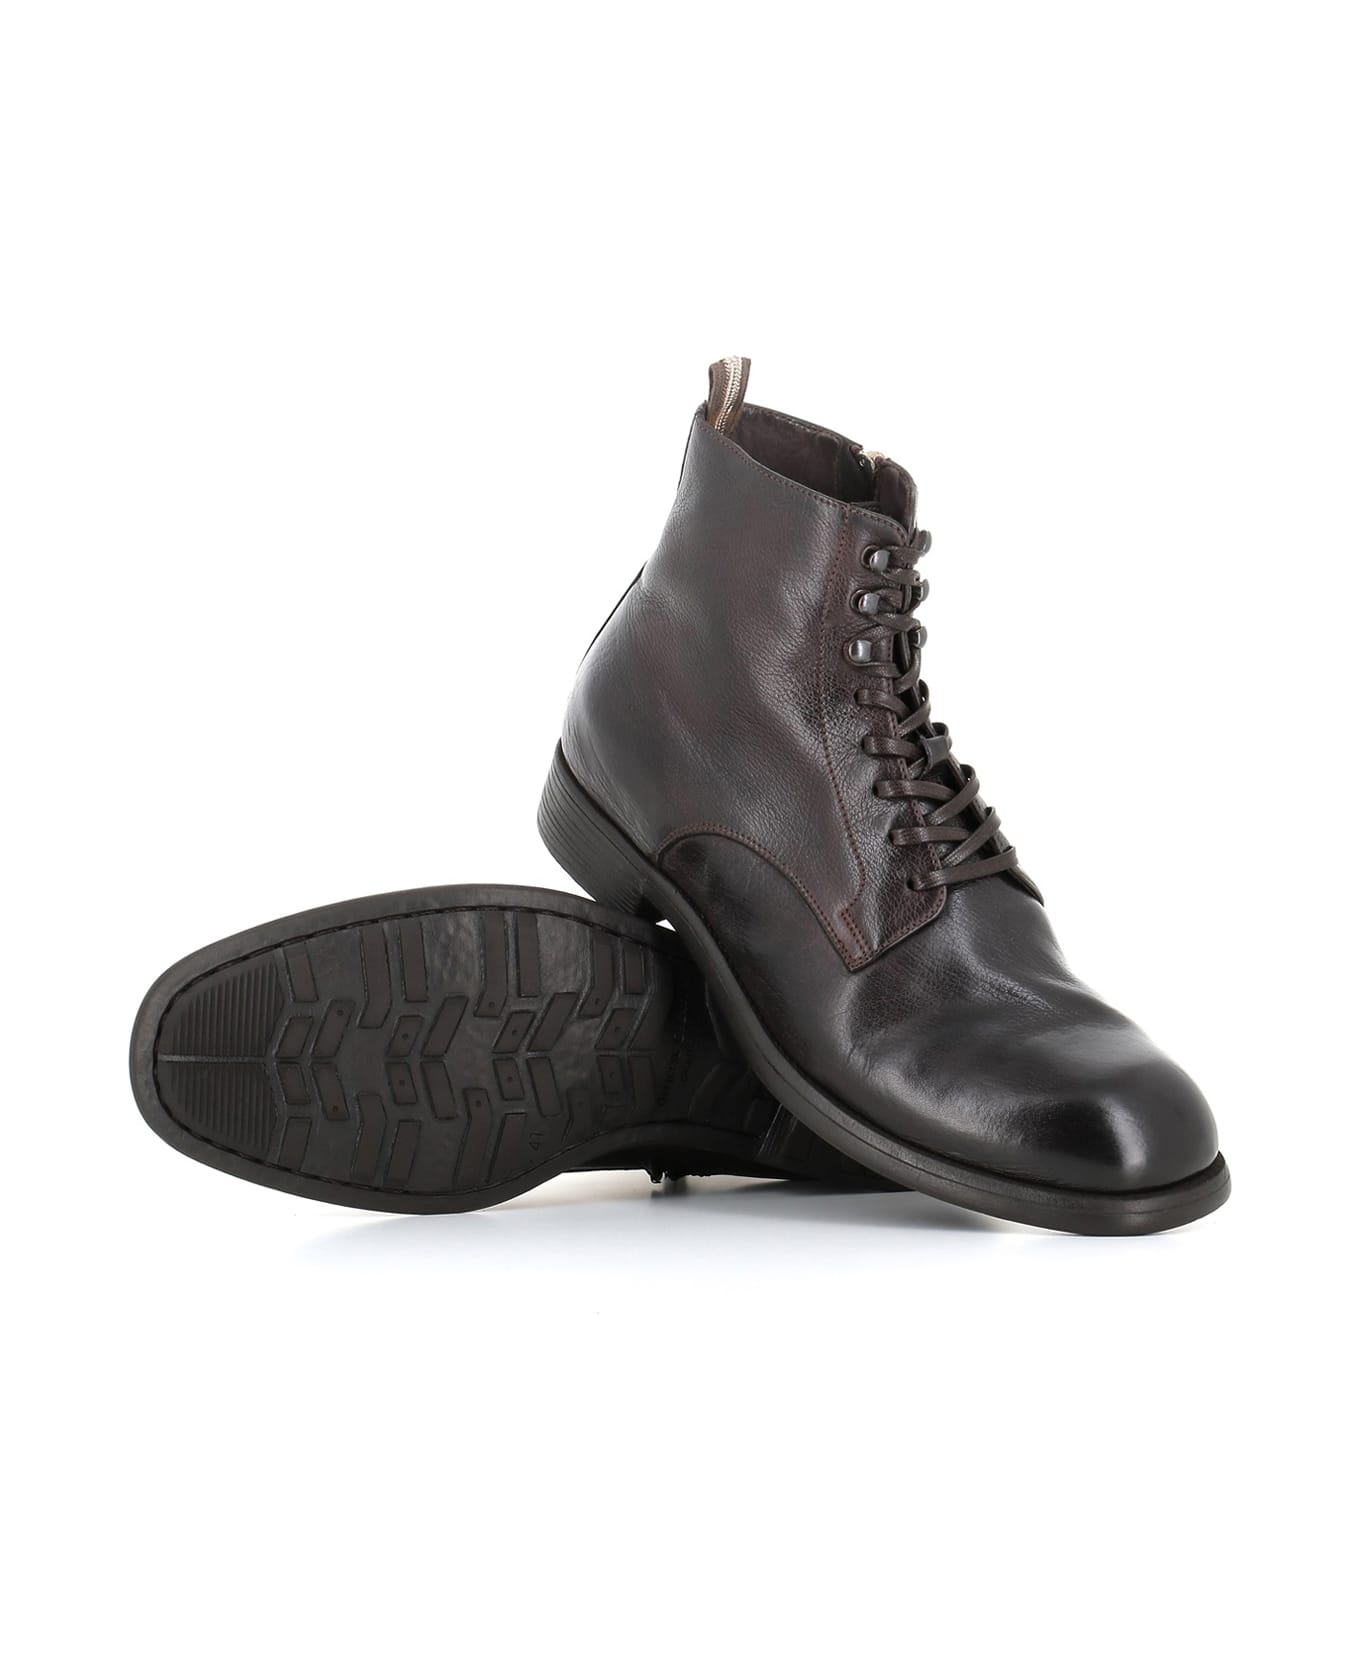 Officine Creative Lace-up Boot Chronicle/004 - Dark brown